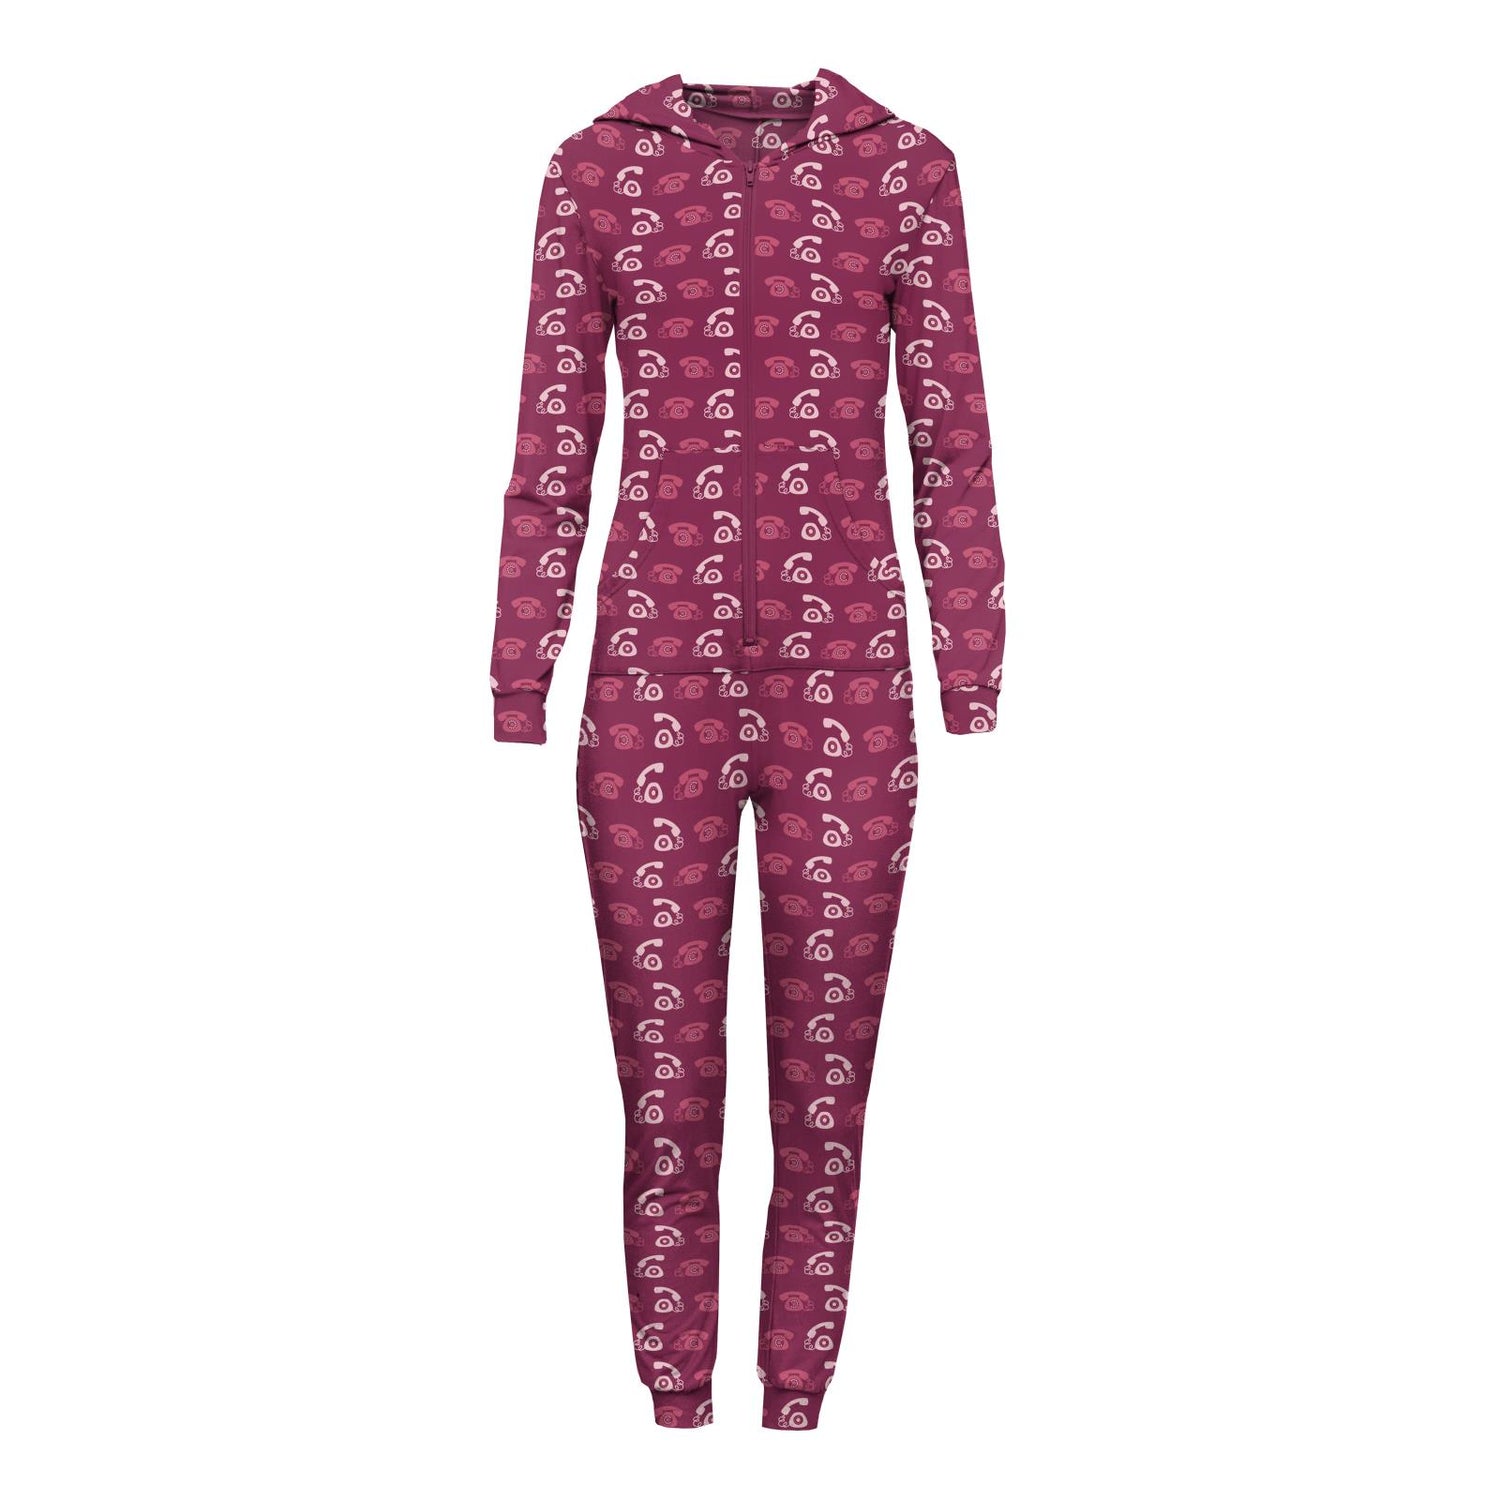 Women's Print Long Sleeve Jumpsuit with Hood in Berry Telephone